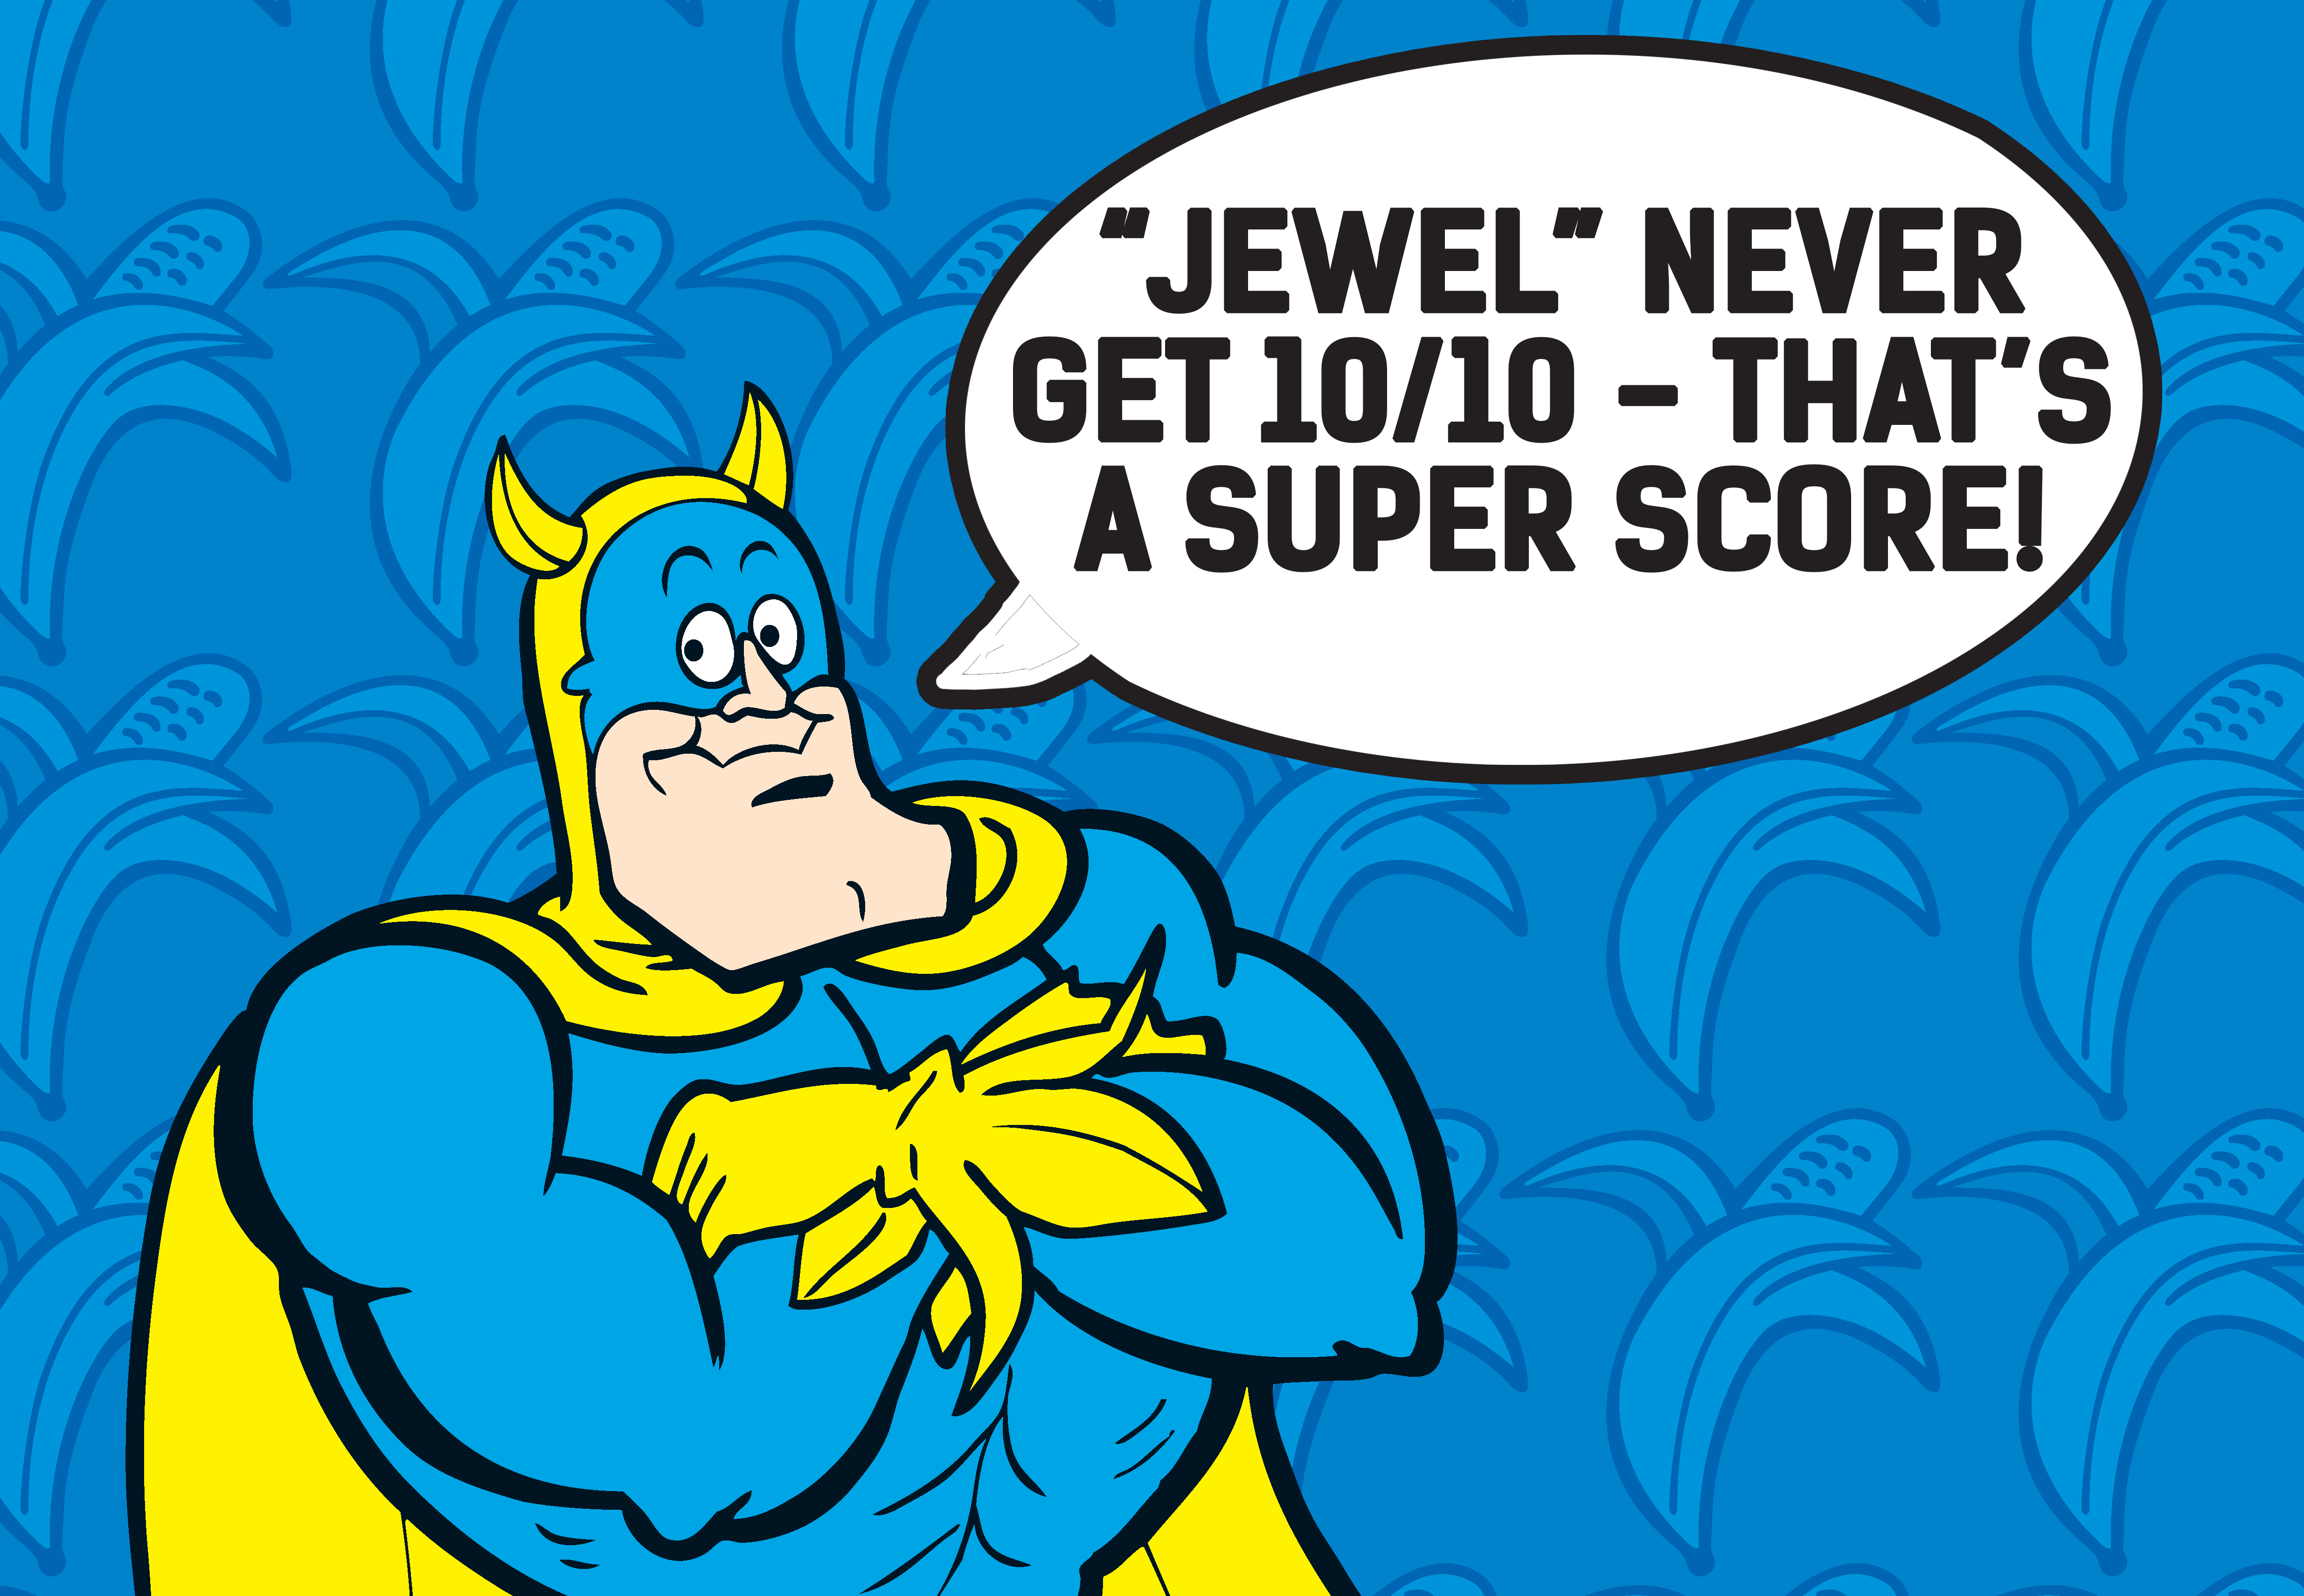 You've heard of the Man of Steel - well, even he quakes before the Man of Peel, Bananaman!